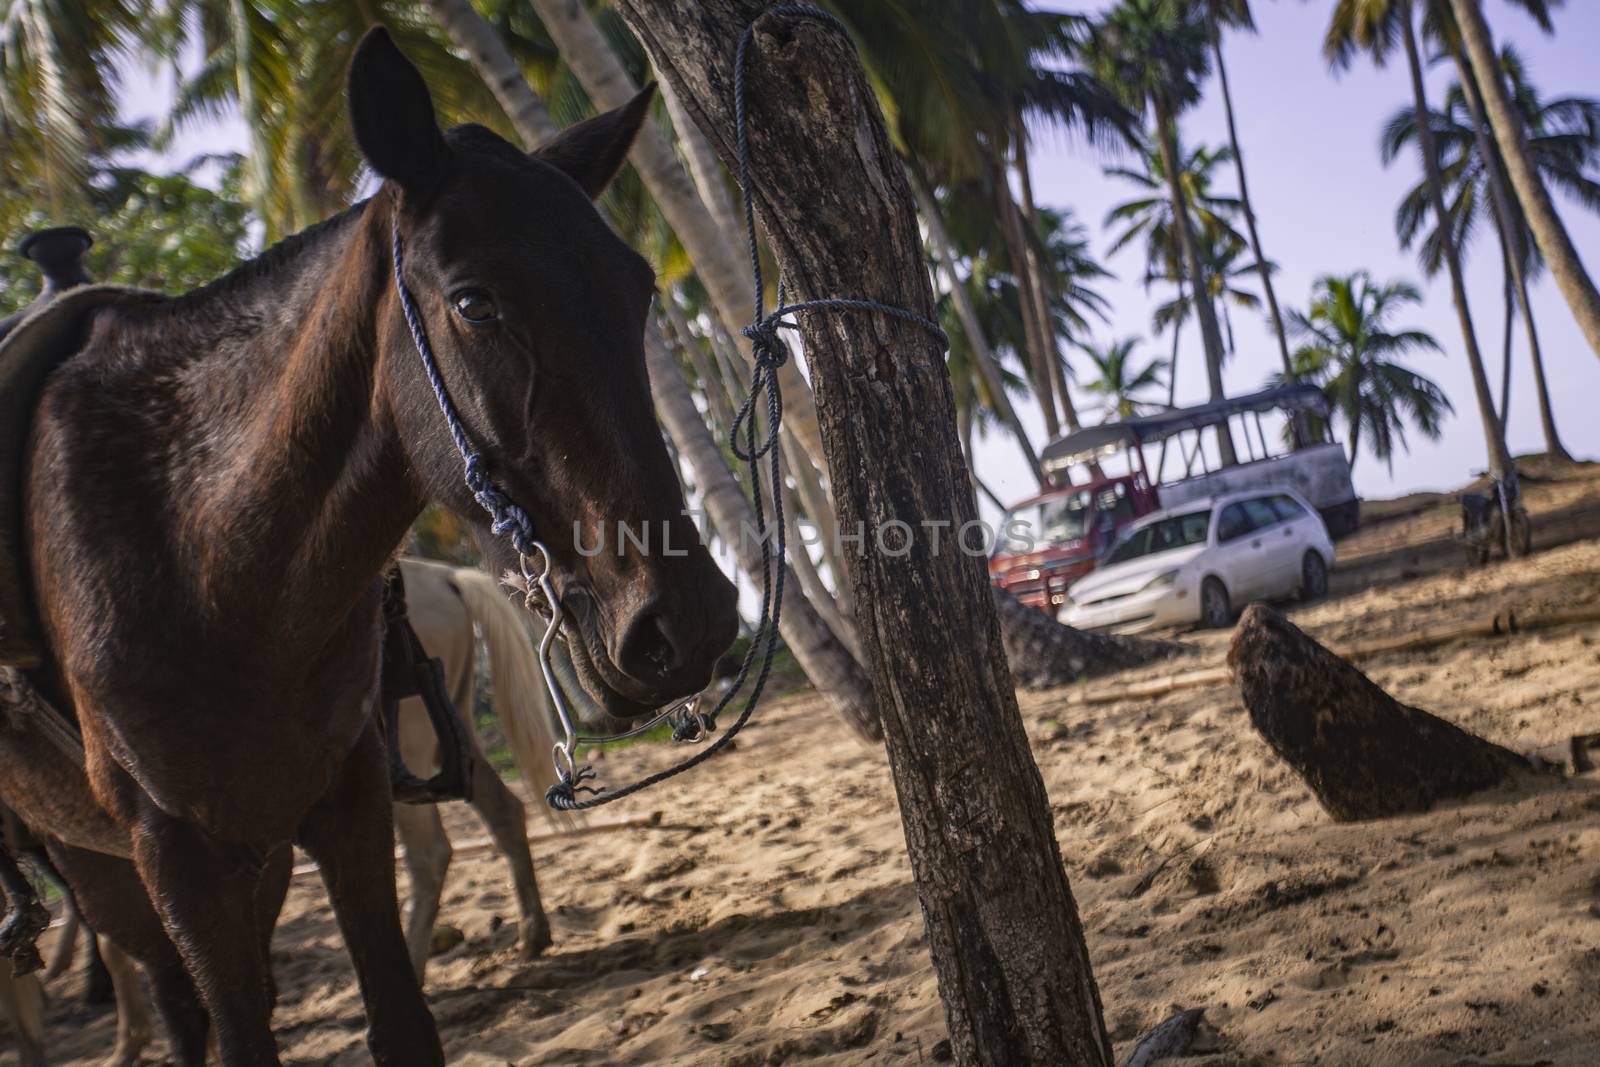 Horses tied in a group waiting to resume the journey